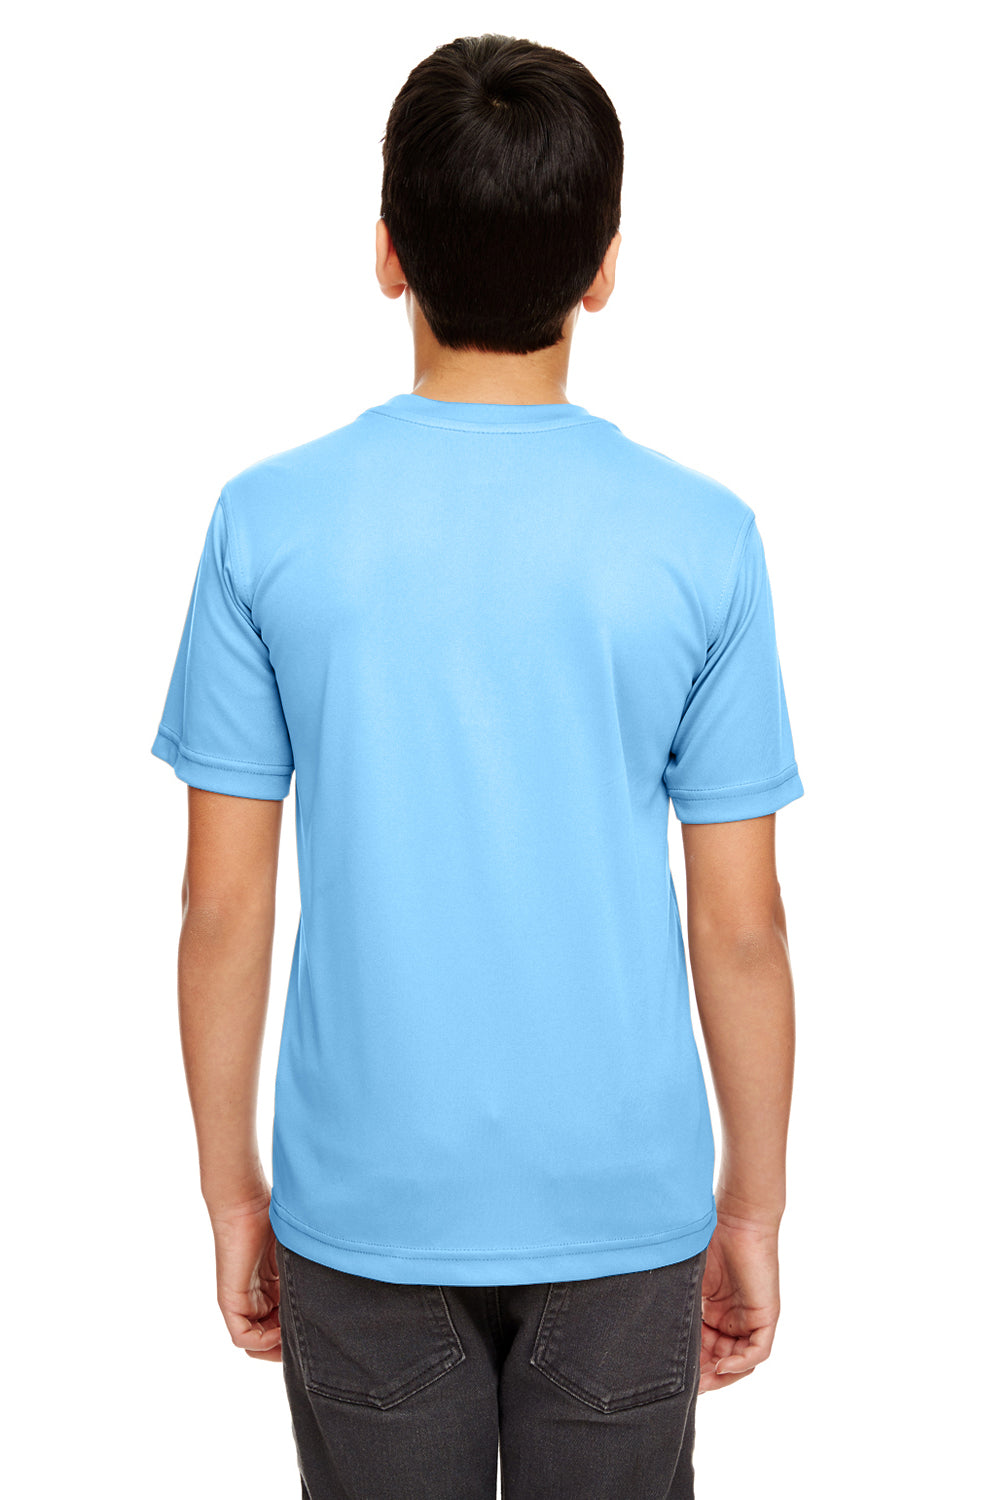 UltraClub 8620Y Youth Cool & Dry Performance Moisture Wicking Short Sleeve Crewneck T-Shirt Columbia Blue Back